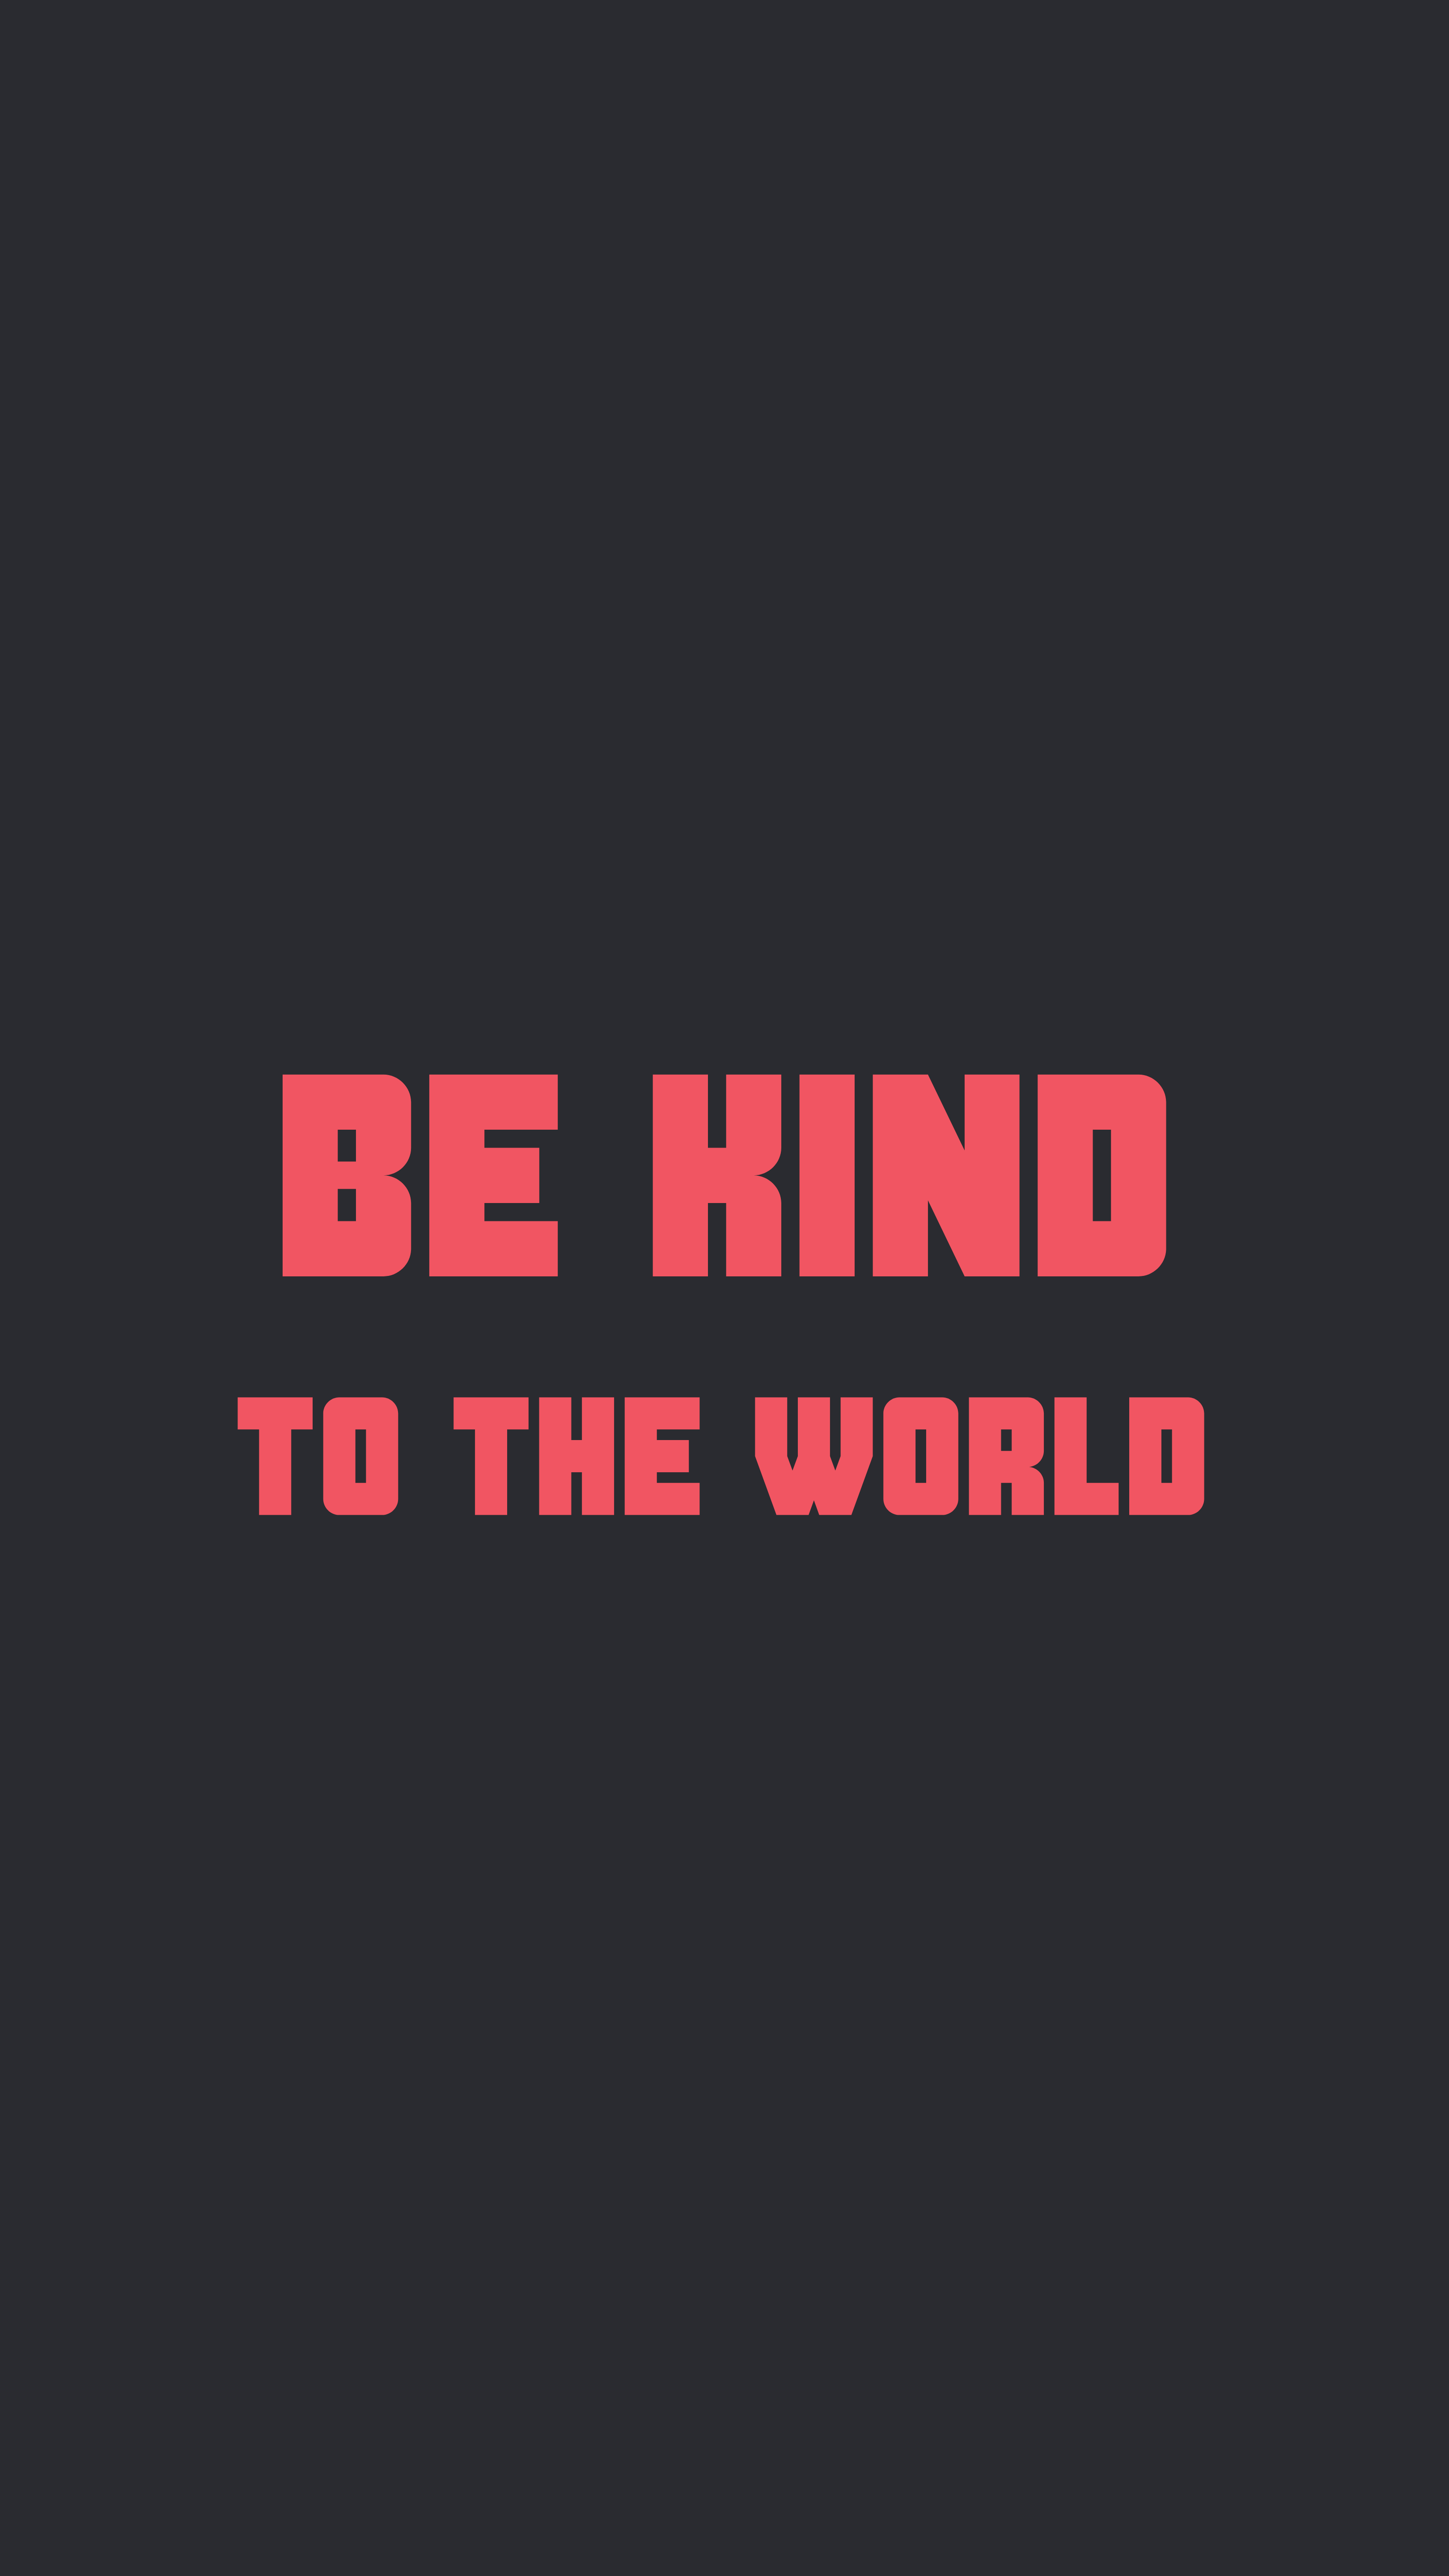 peace, world, words, kindness collection of HD images